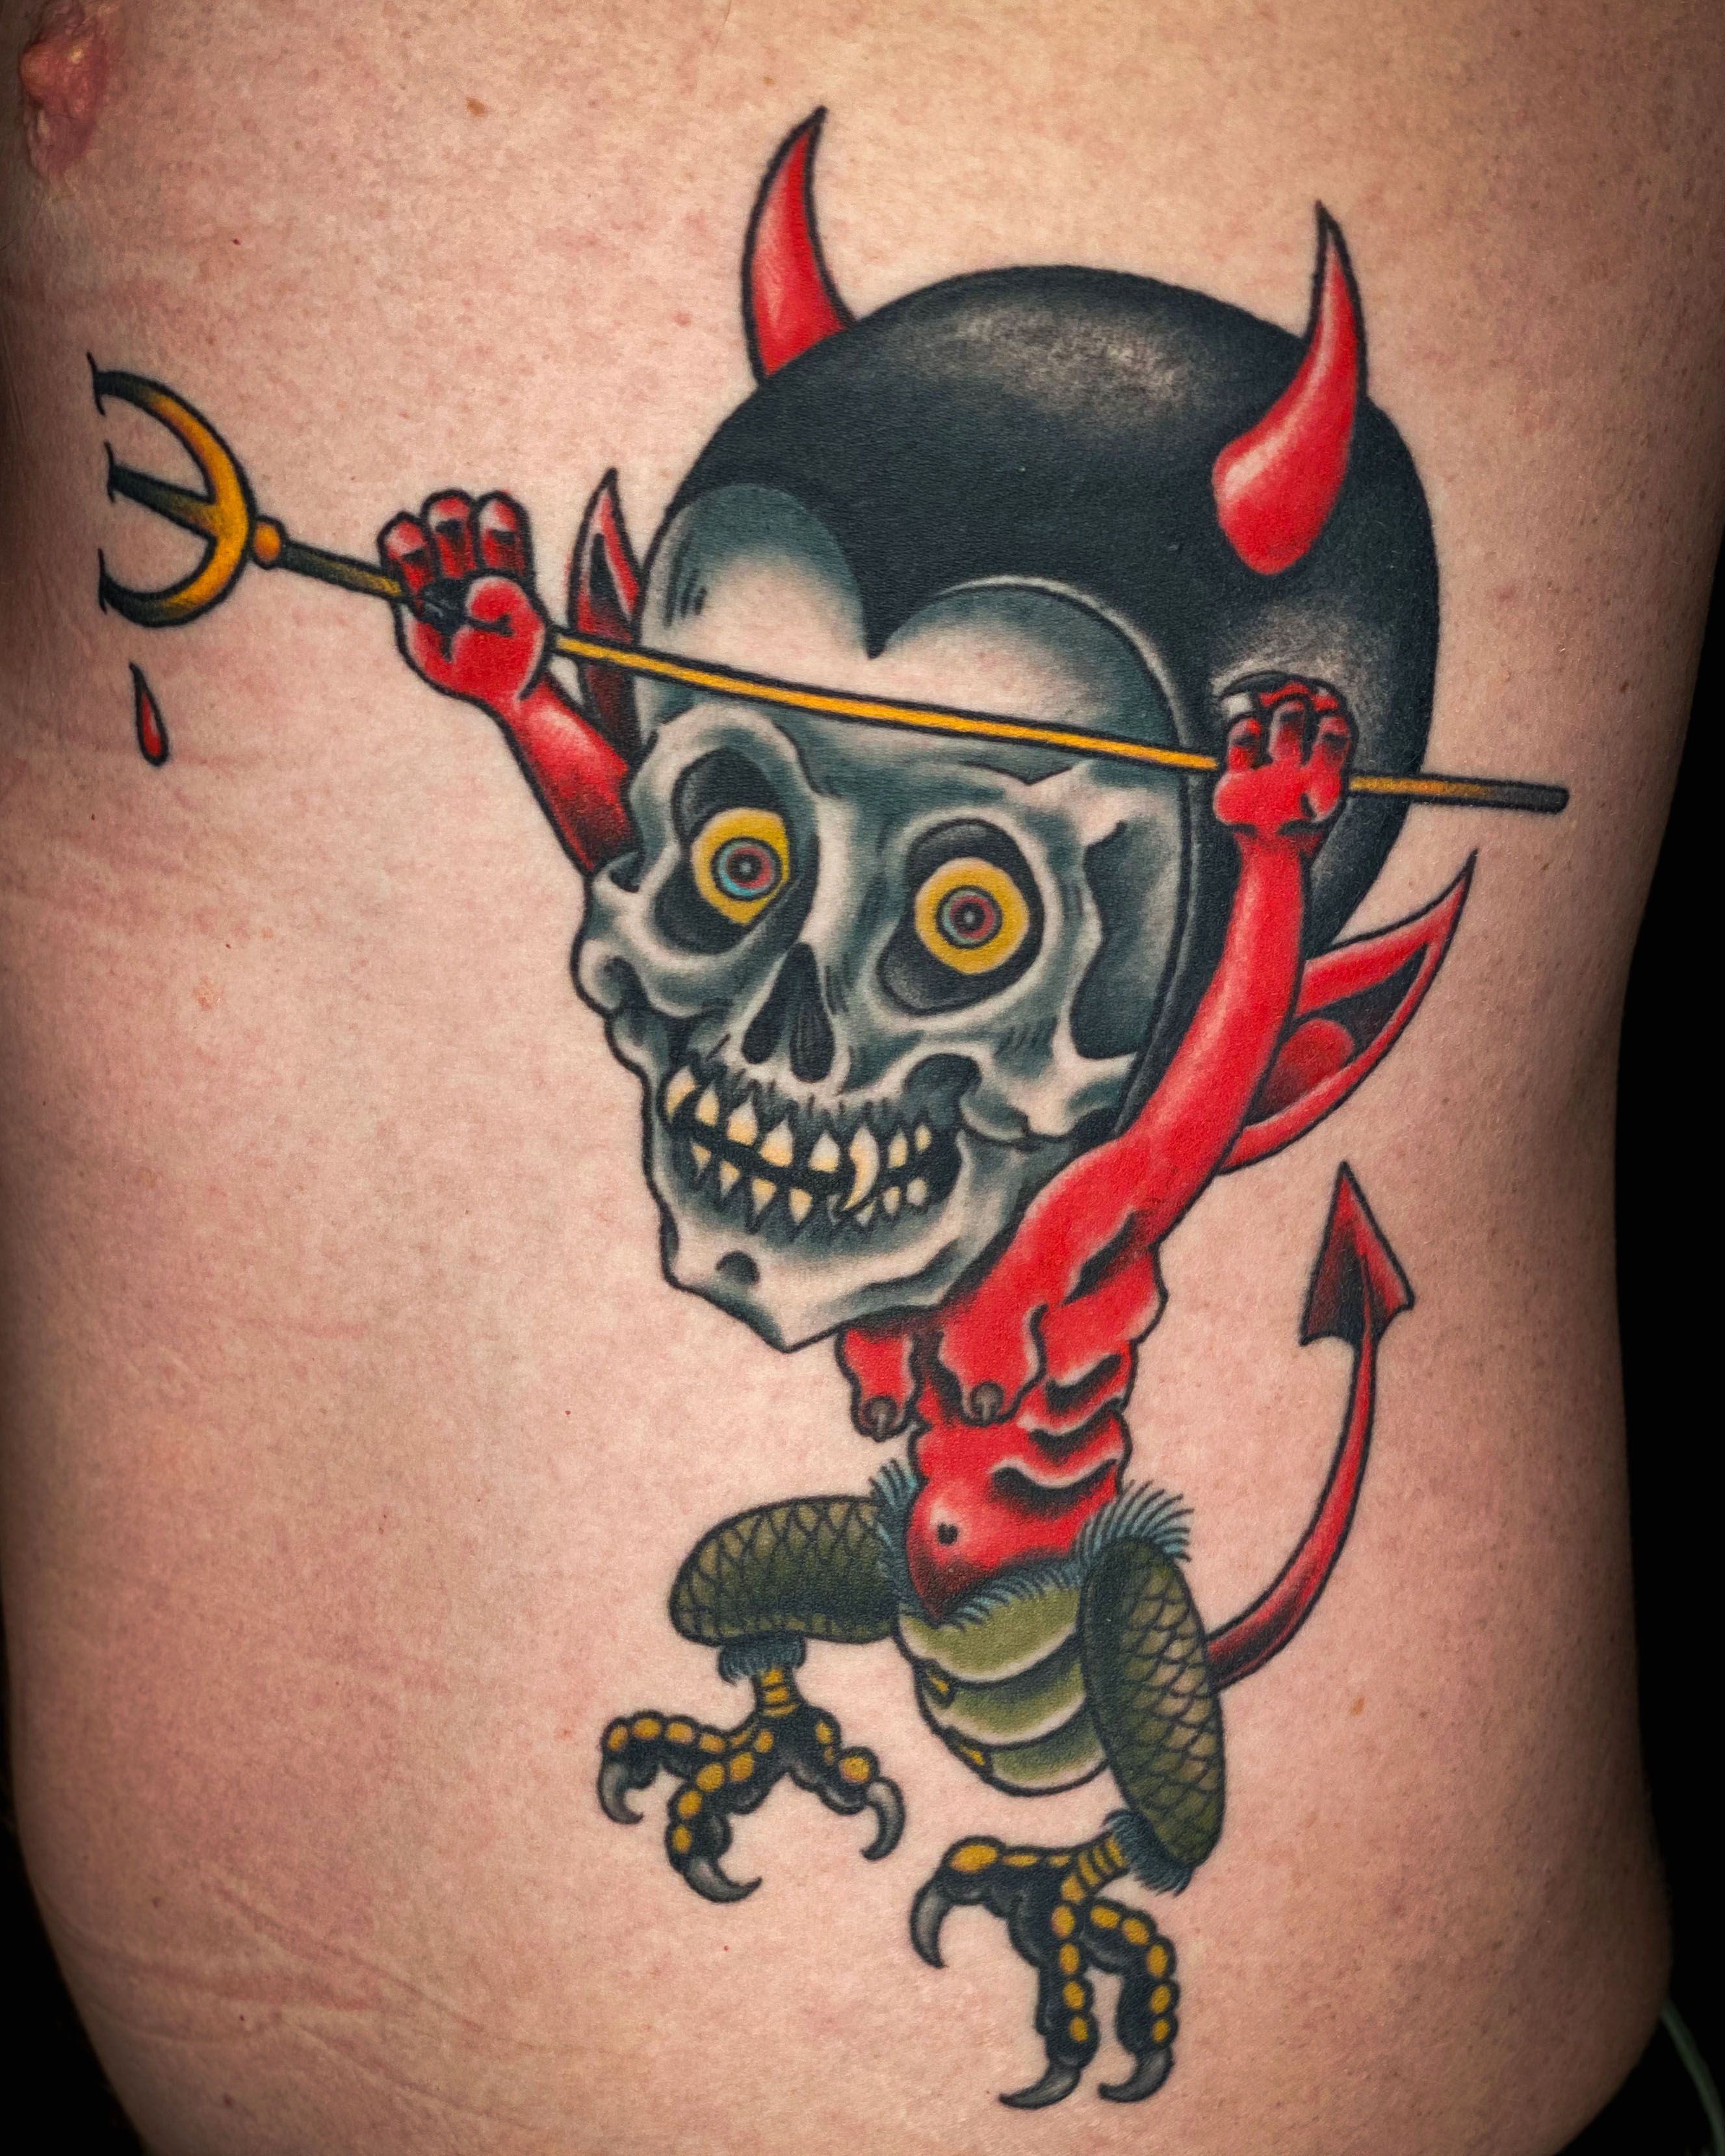 Tasmanian Devil Semi-Permanent Tattoo. Lasts 1-2 weeks. Painless and easy  to apply. Organic ink. Browse more or create your own. | Inkbox™ |  Semi-Permanent Tattoos